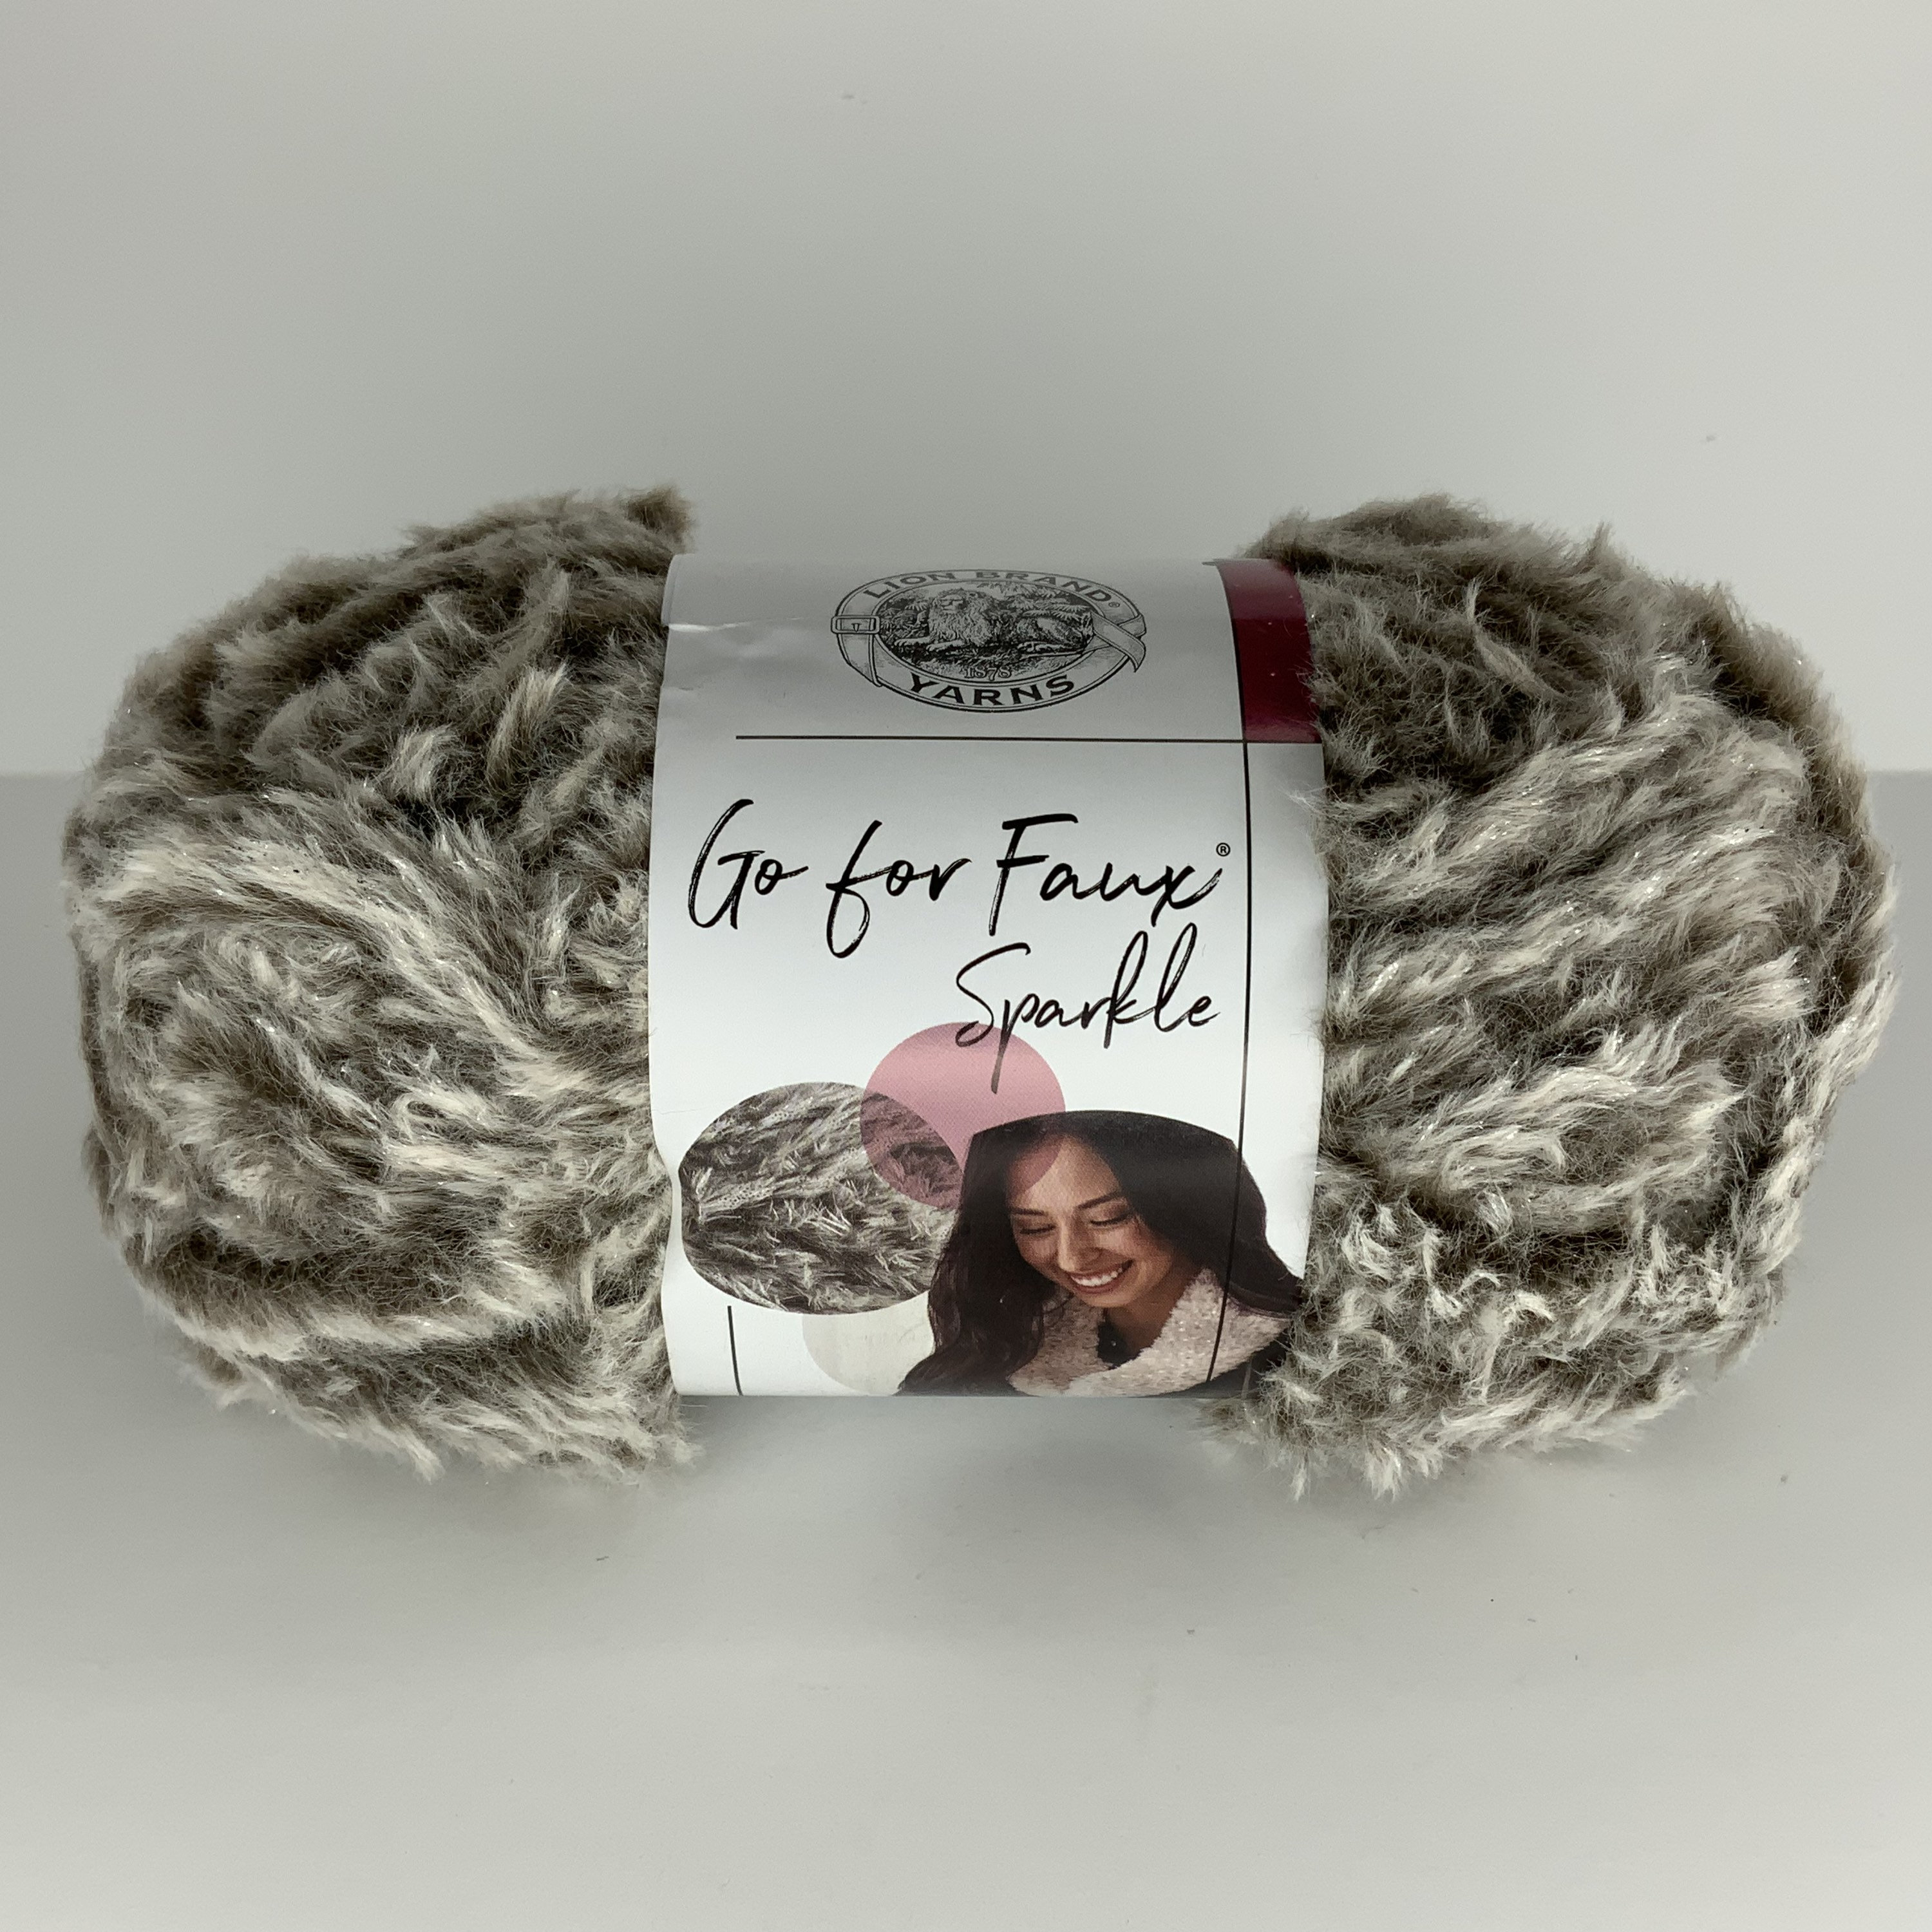 Lion Brand Yarn (1 Skein) Go for Faux Thick & Quick Bulky Yarn, Baked Alaska